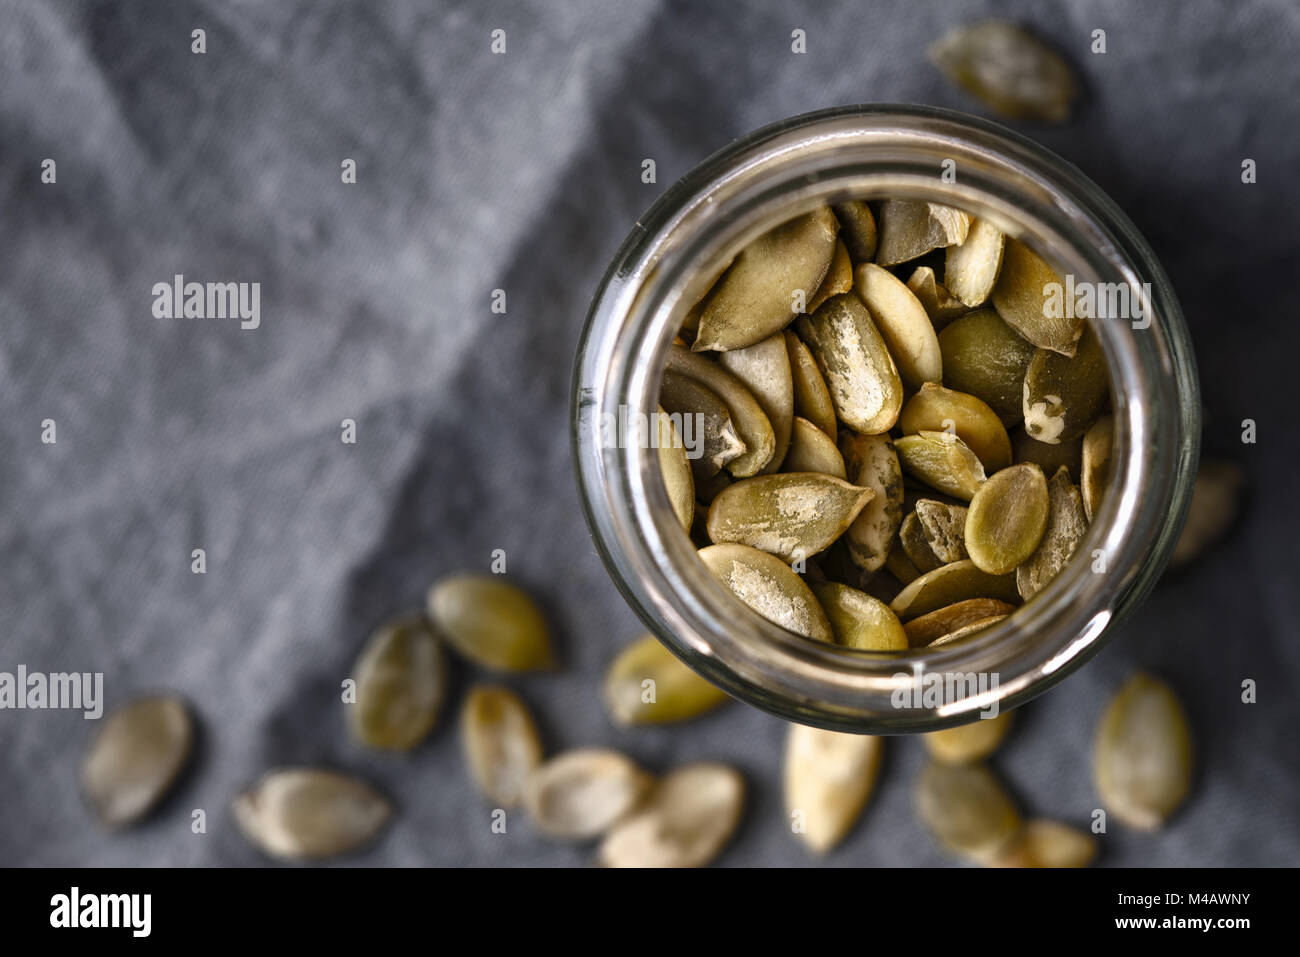 Pumpkin seeds in the glass jar cloth-up Stock Photo